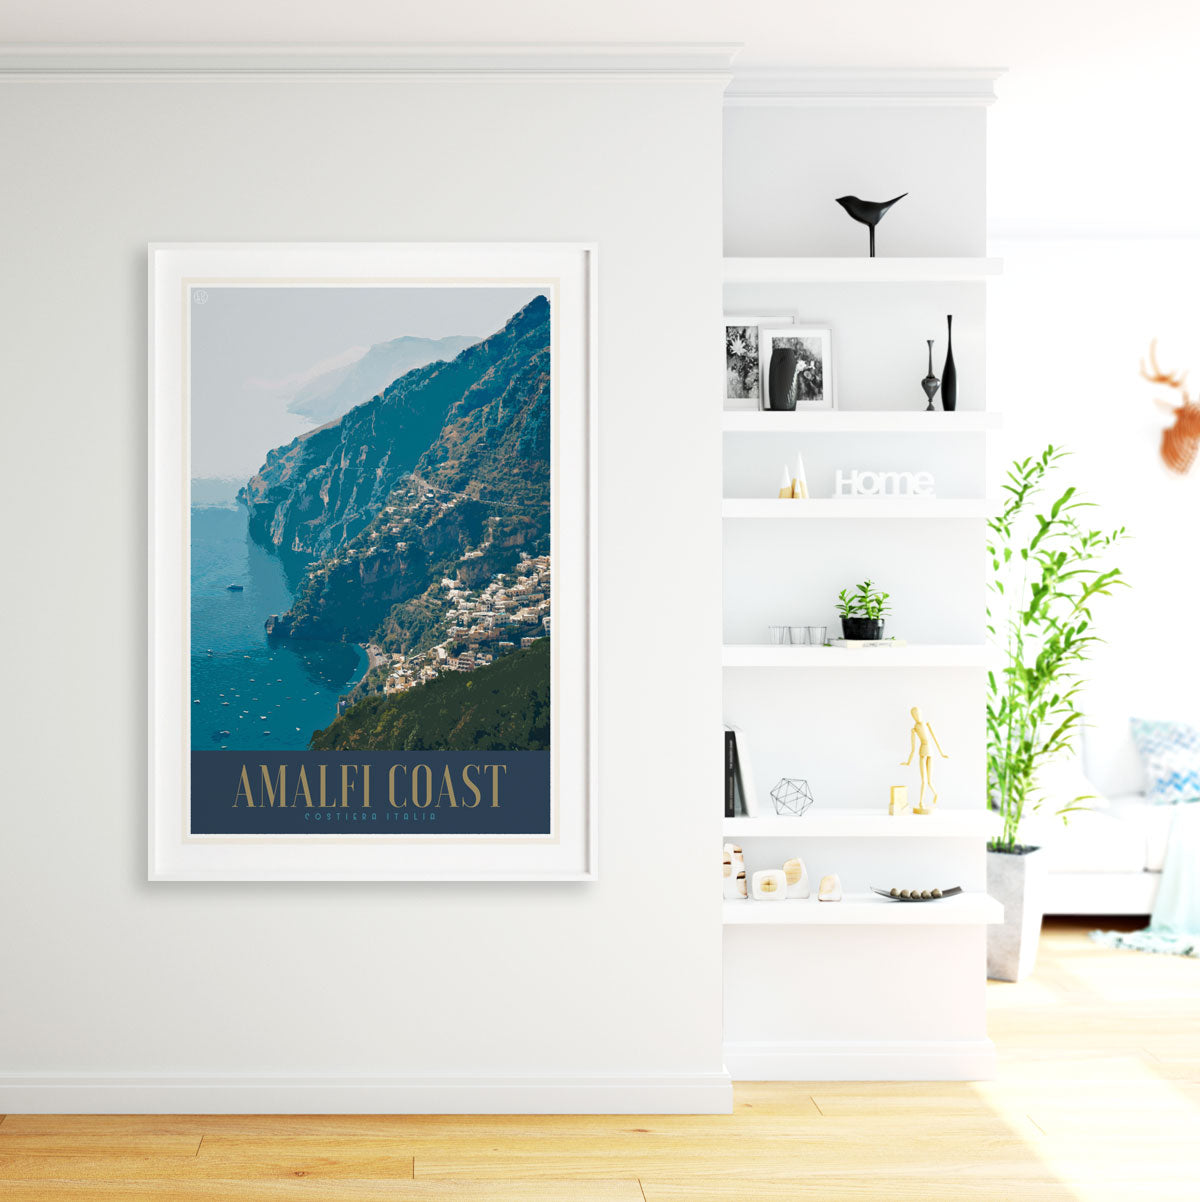 Amalfi Coast Italy vintage travel style white framed poster by places we luv